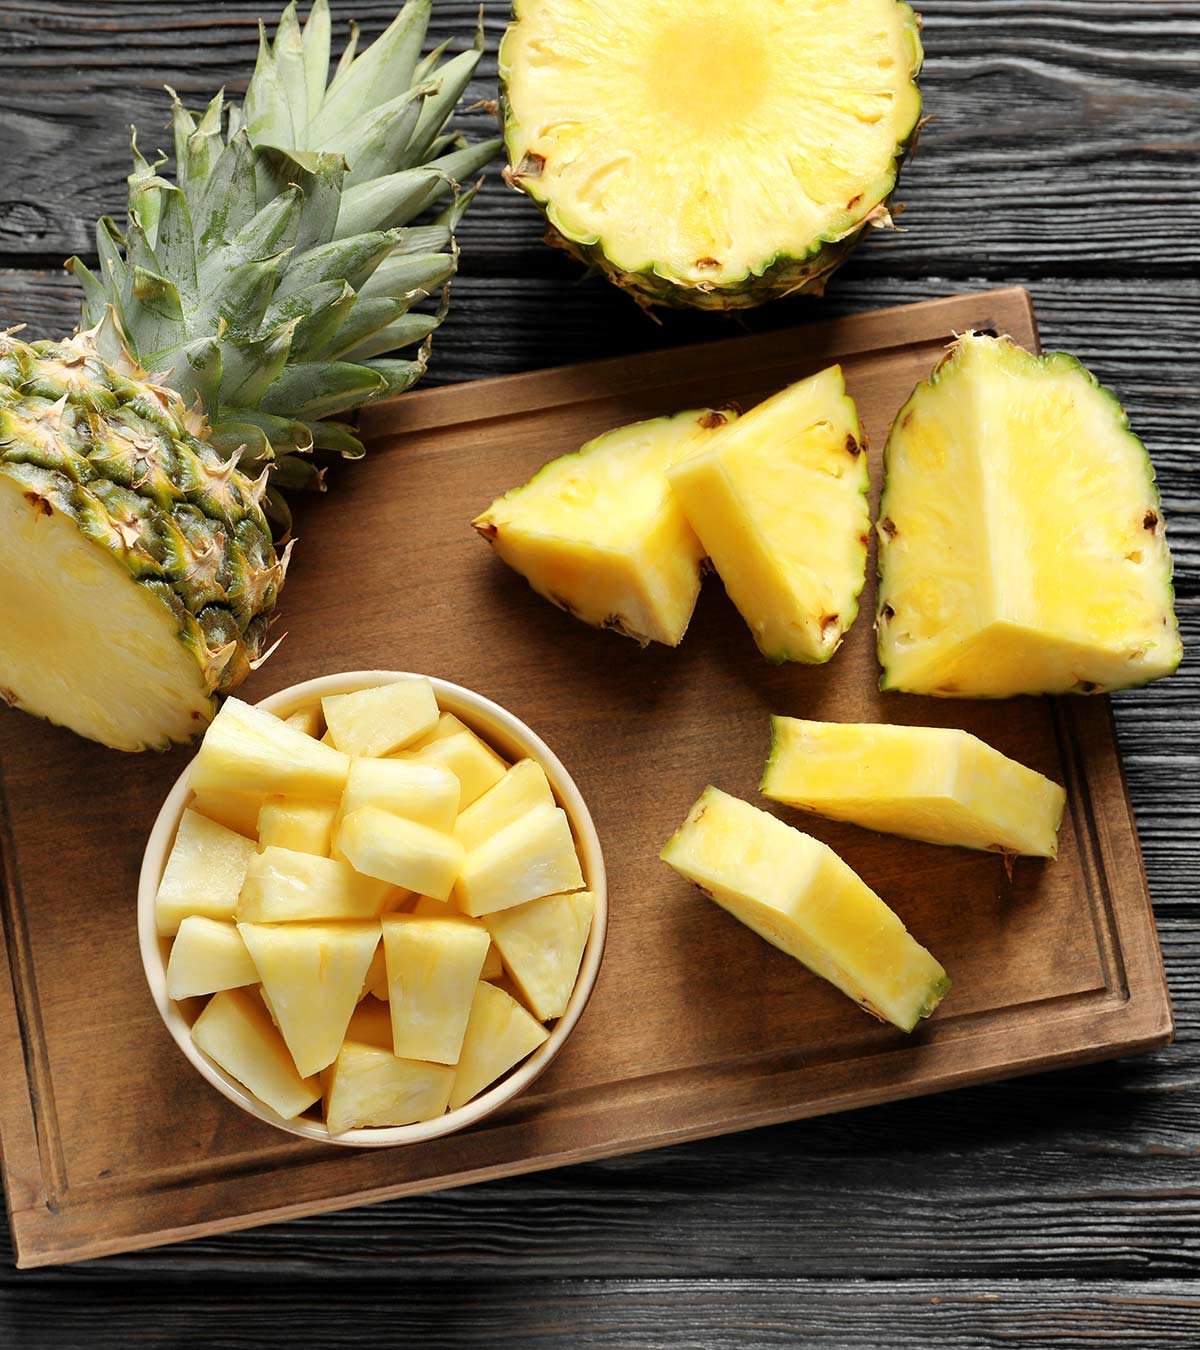 Pineapple For Babies: Health Benefits, Risks, And Recipes